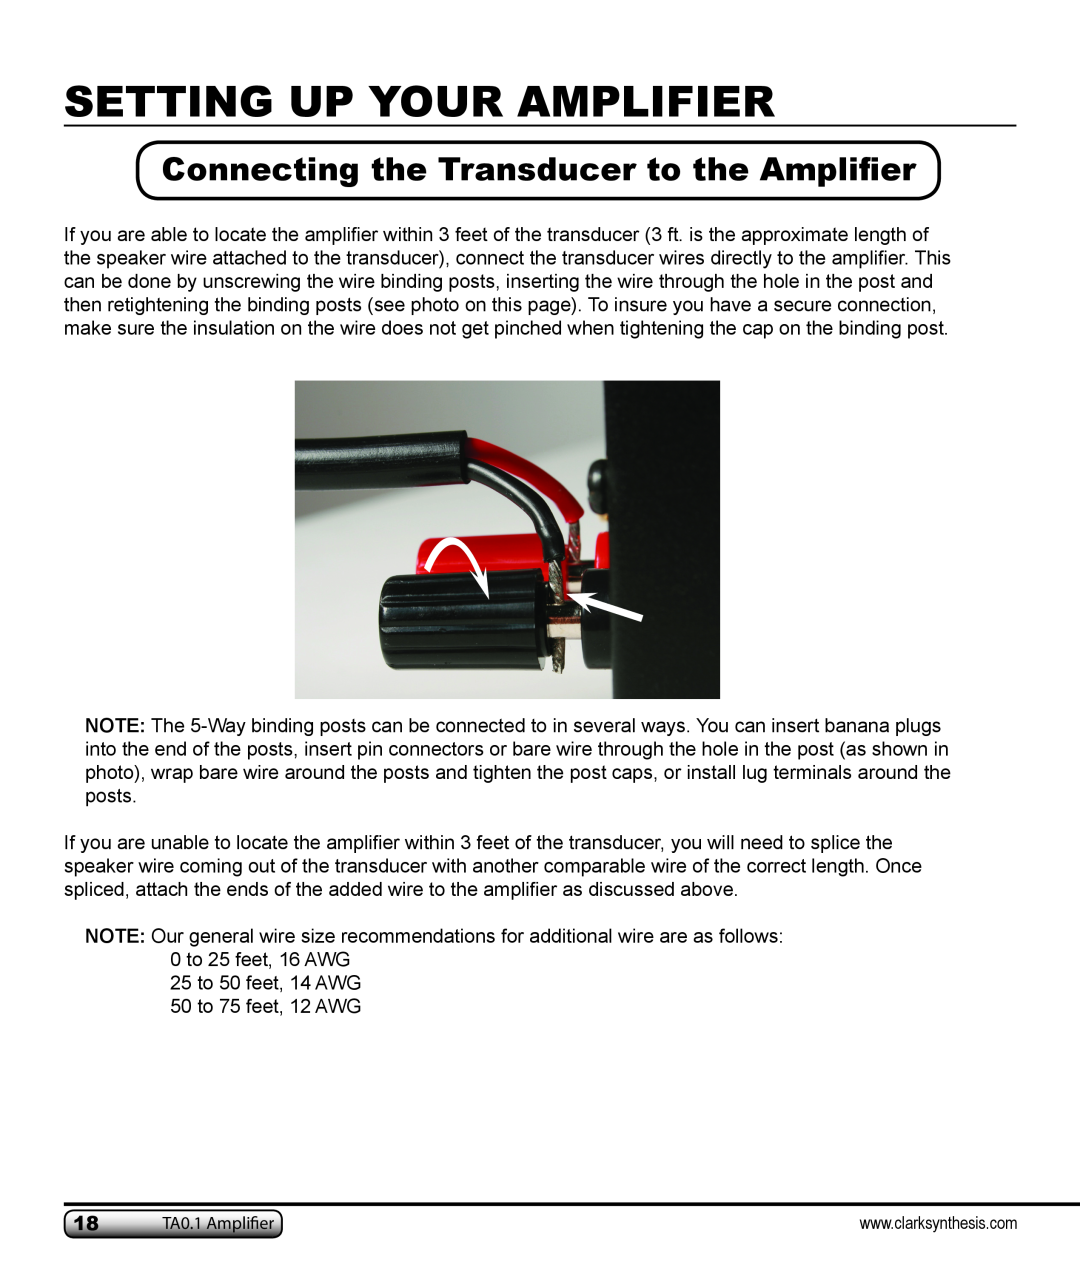 Clark Synthesis TA0.1 owner manual Connecting the Transducer to the Amplifier, Setting Up Your Amplifier 